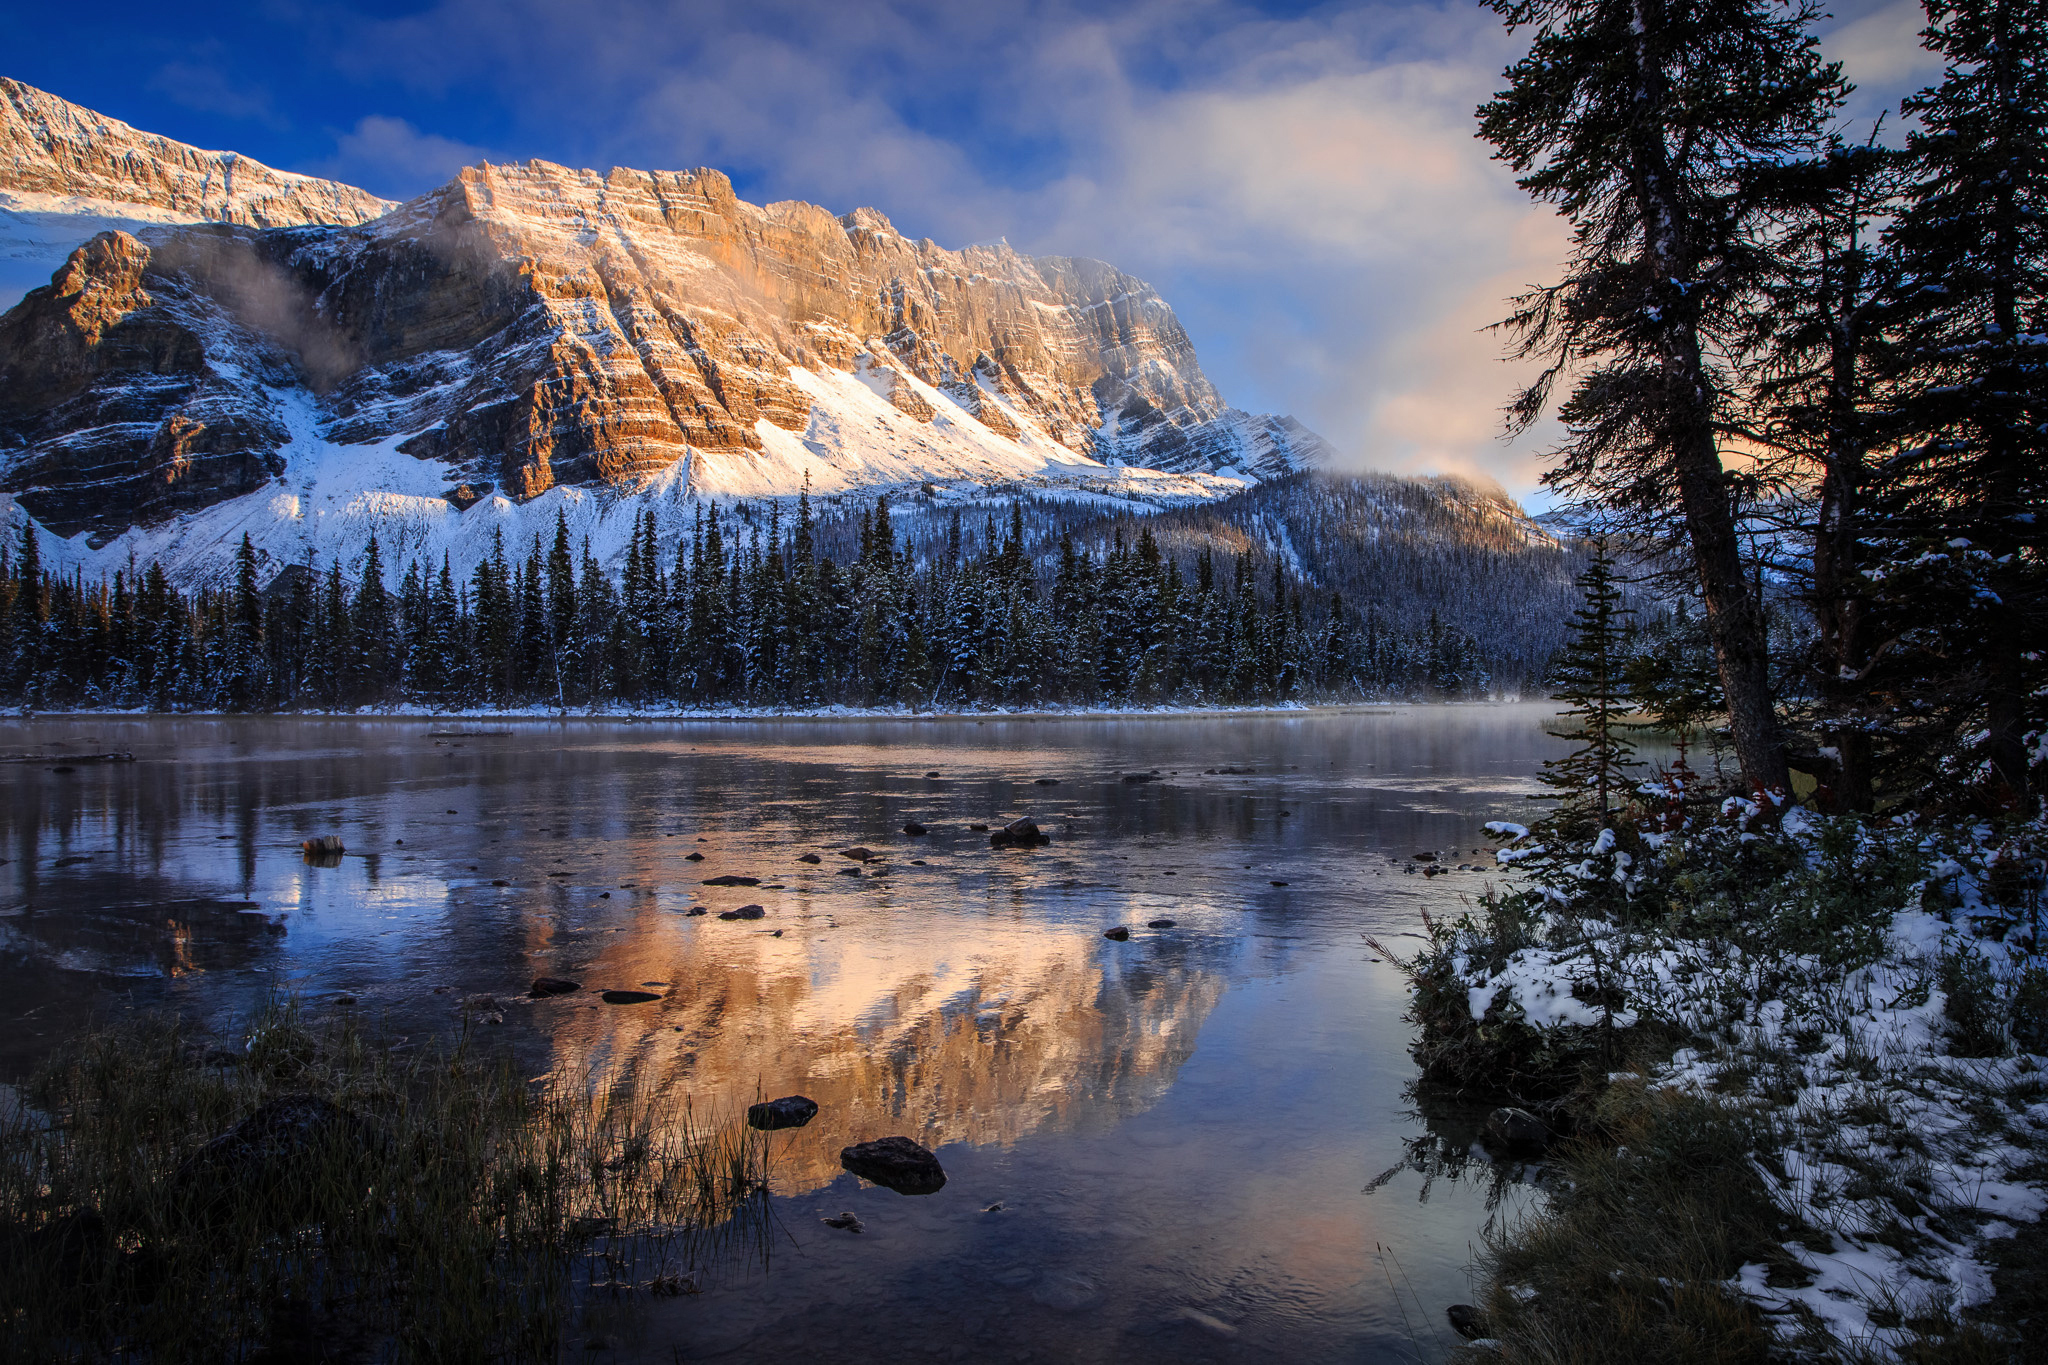 92301 download wallpaper nature, mountains, lake, canada, banff national park screensavers and pictures for free